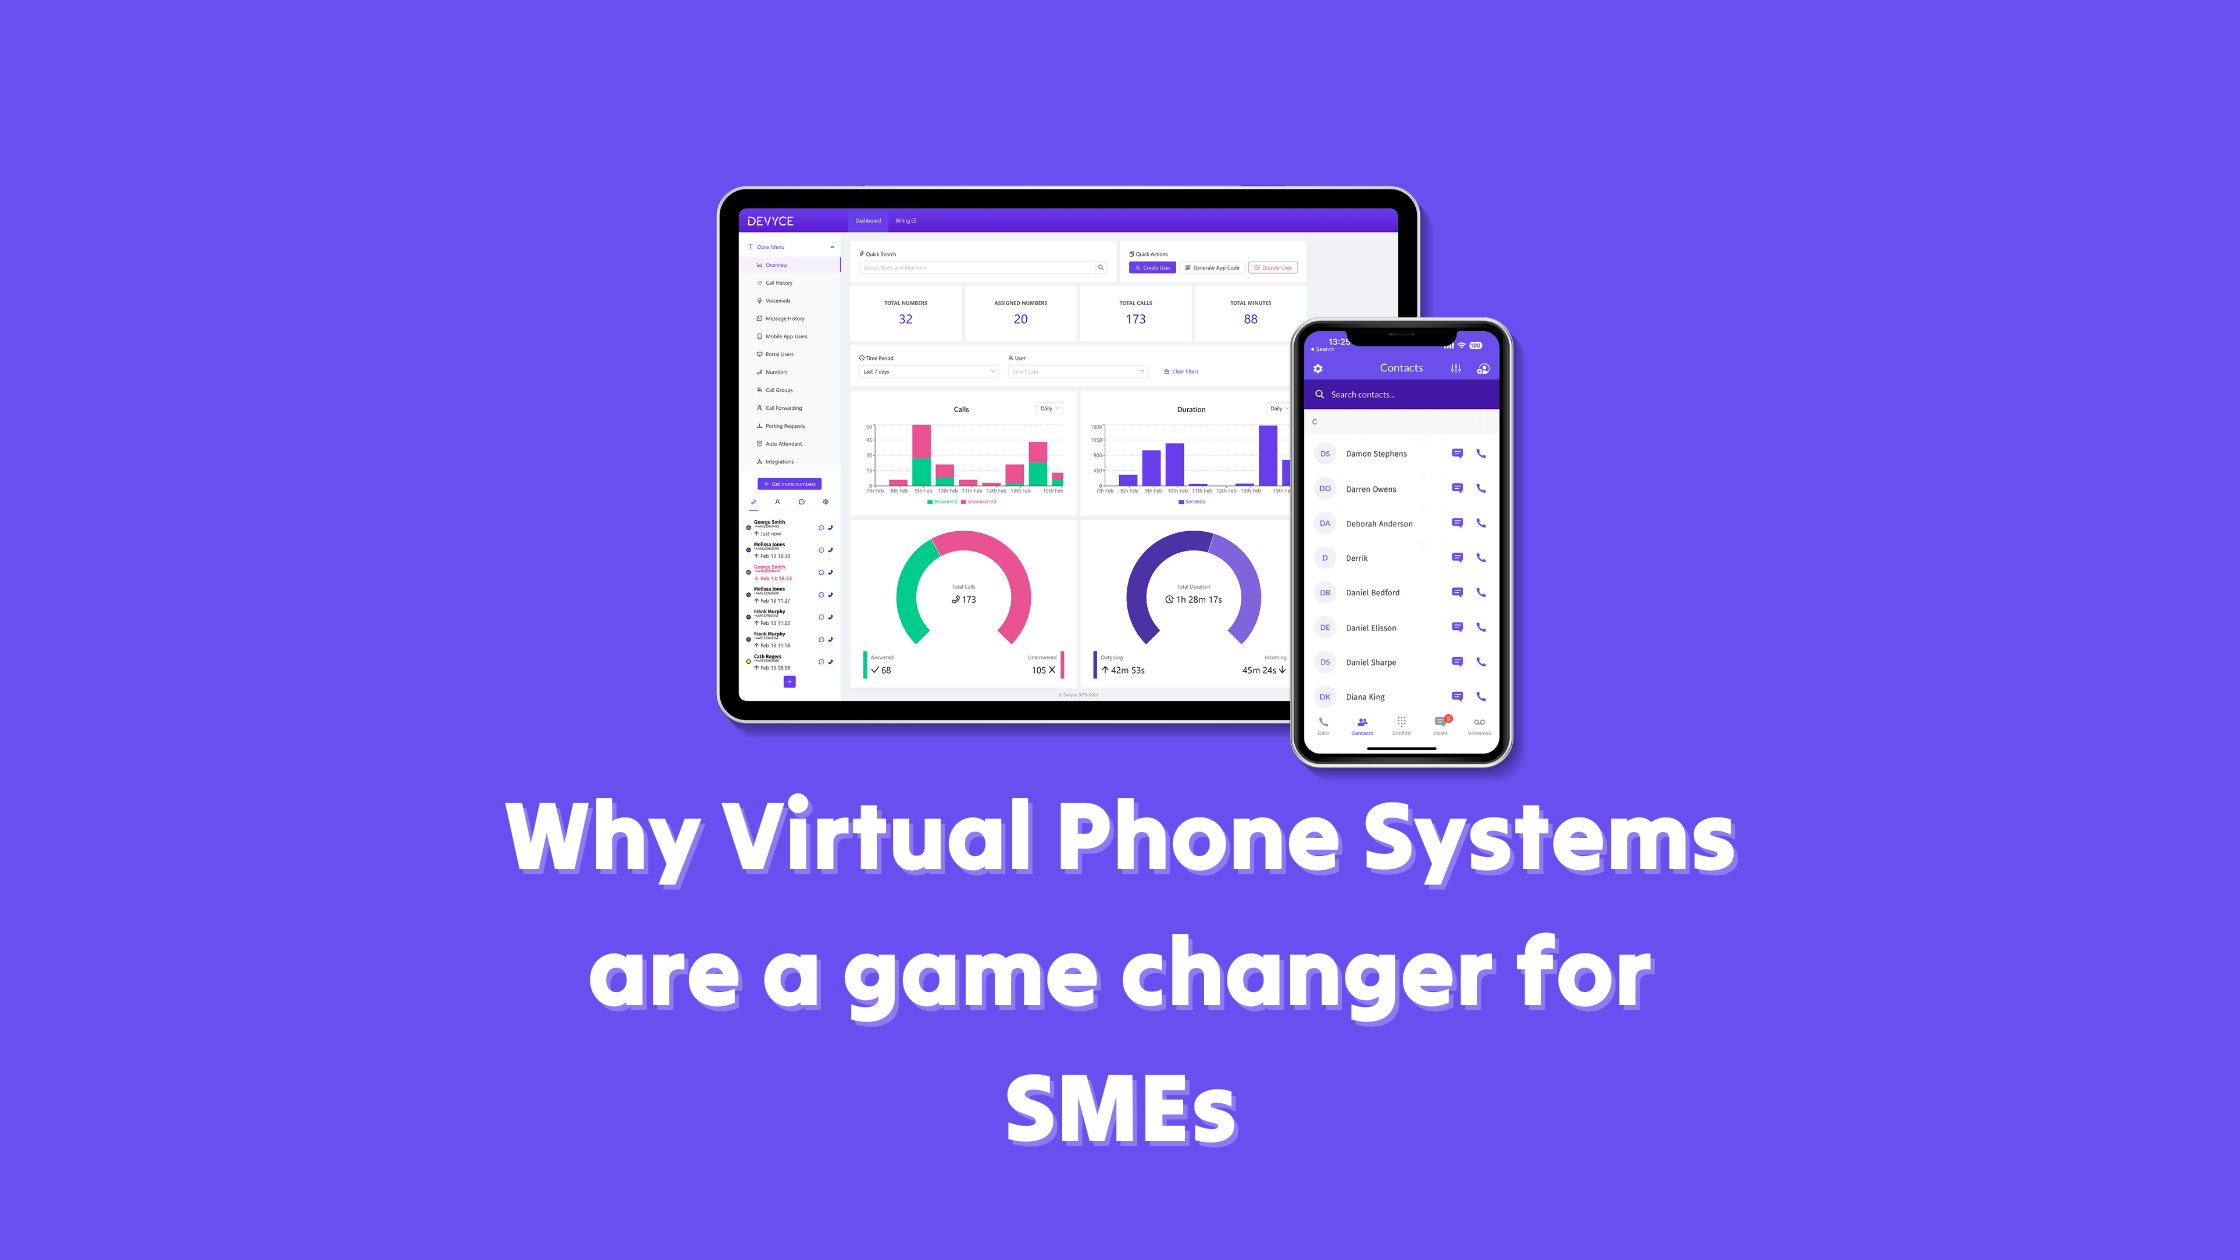 Why virtual phone systems are a game changer with a picture of an ipad showing a management portal dashboard and a smartphone with call history screen showing